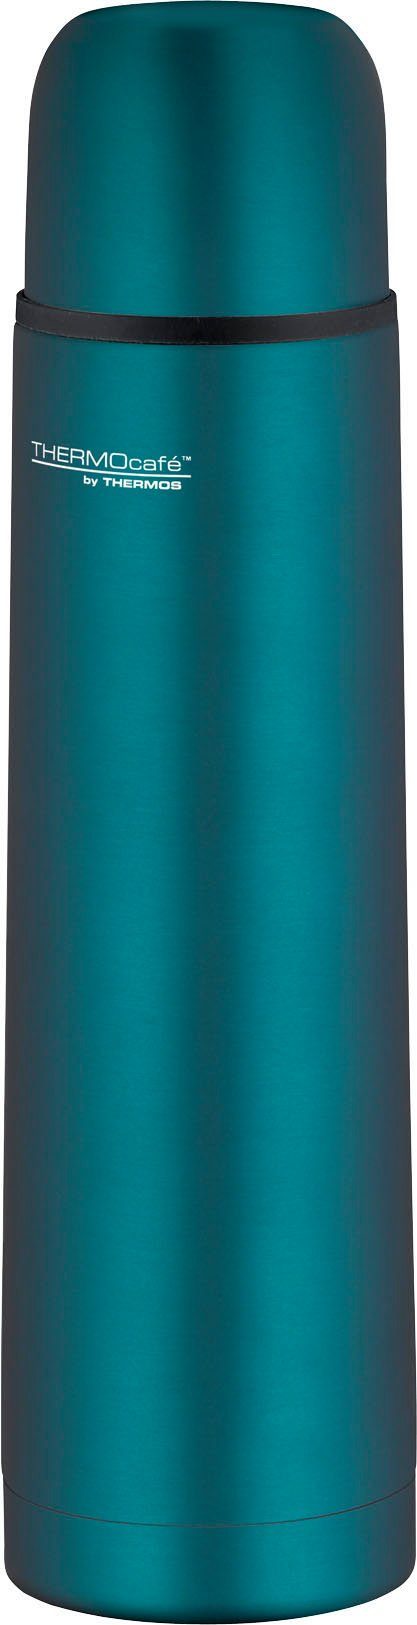 THERMOS Isolierflasche Everyday blau